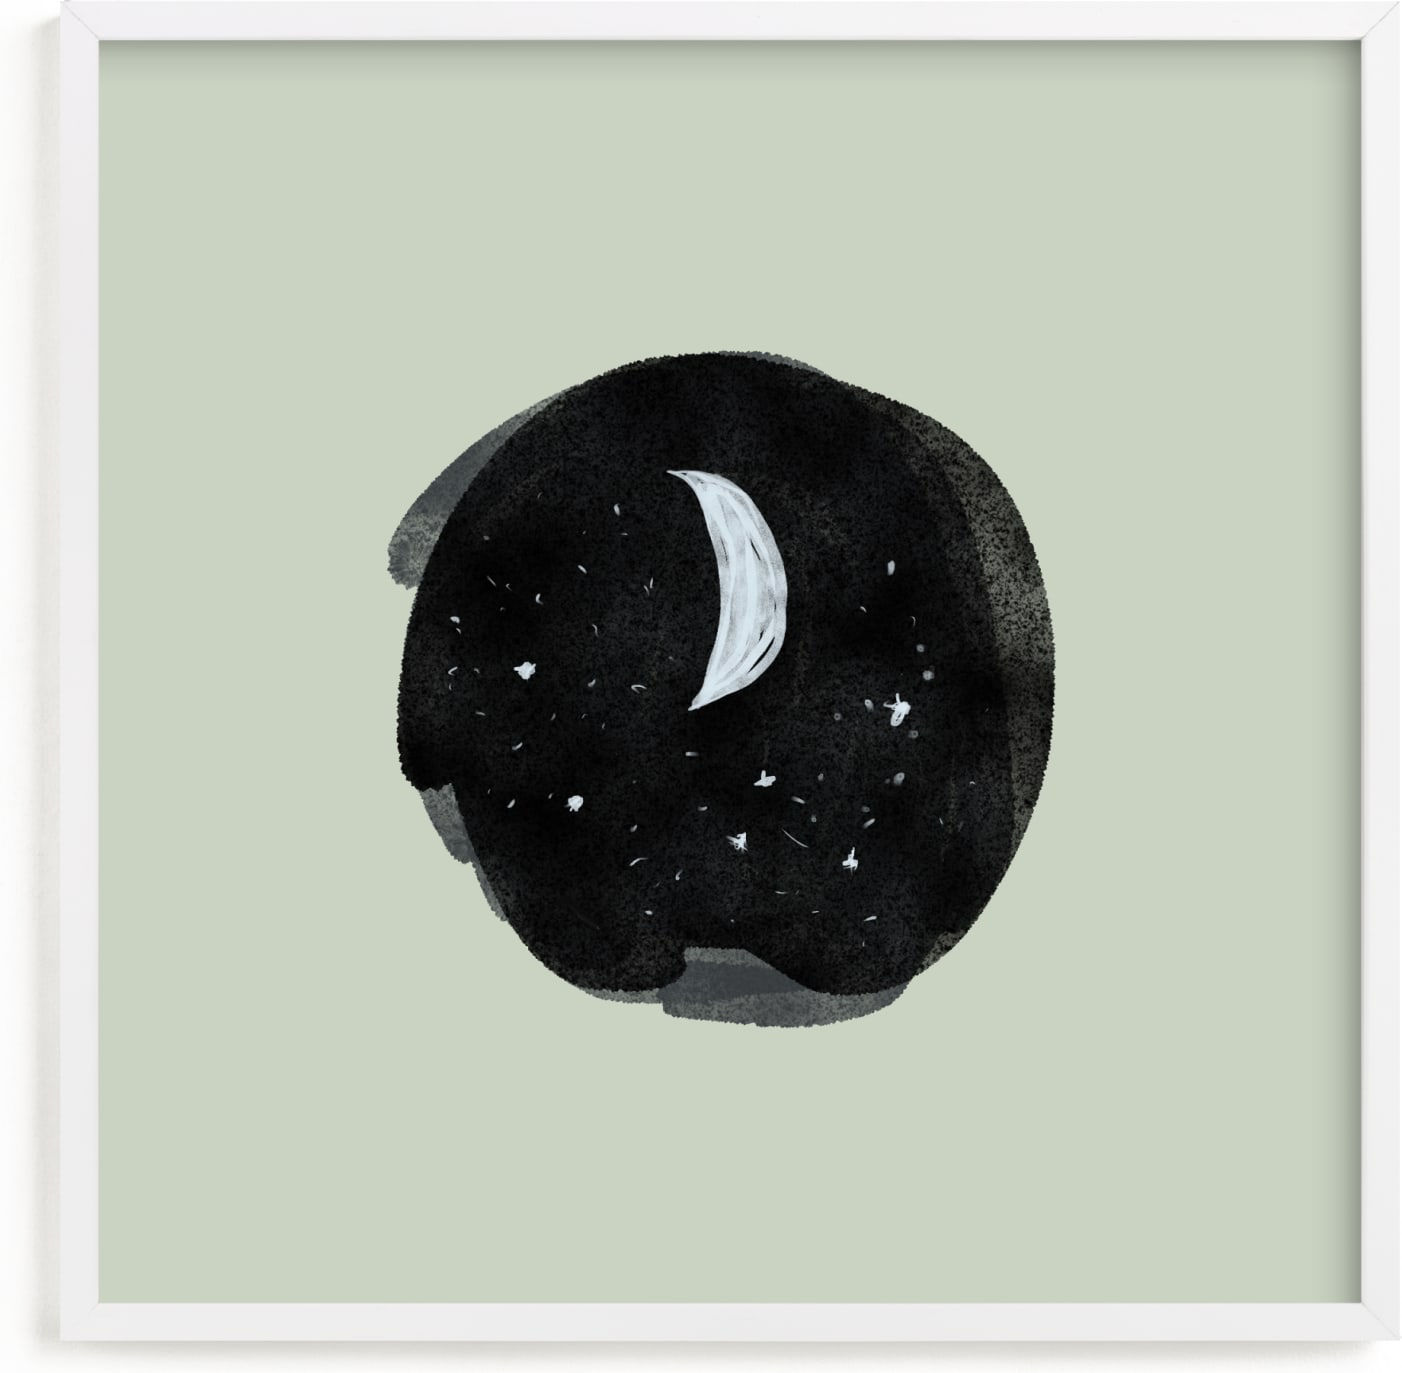 This is a black nursery wall art by Nancy Noreth called Little Moon.